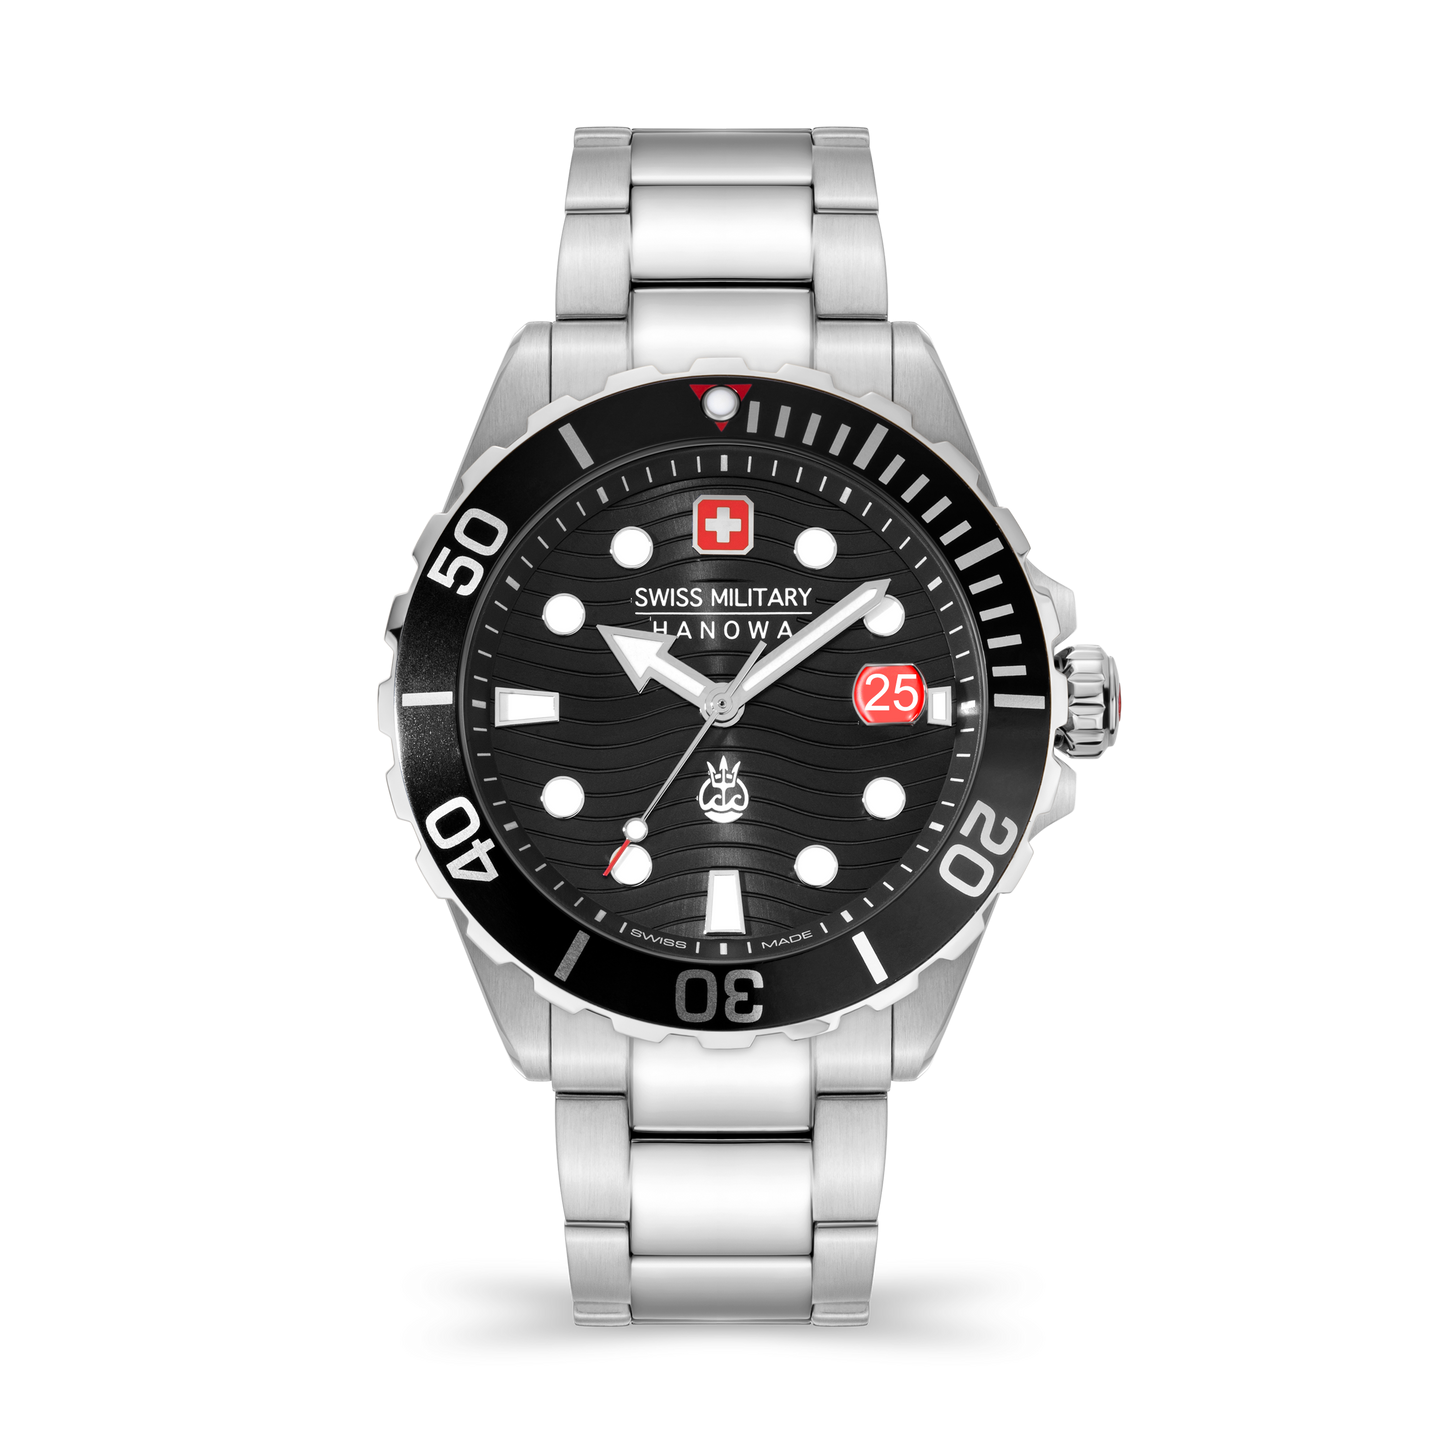 Swiss Military by Hanova OFFSHORE DIVER II